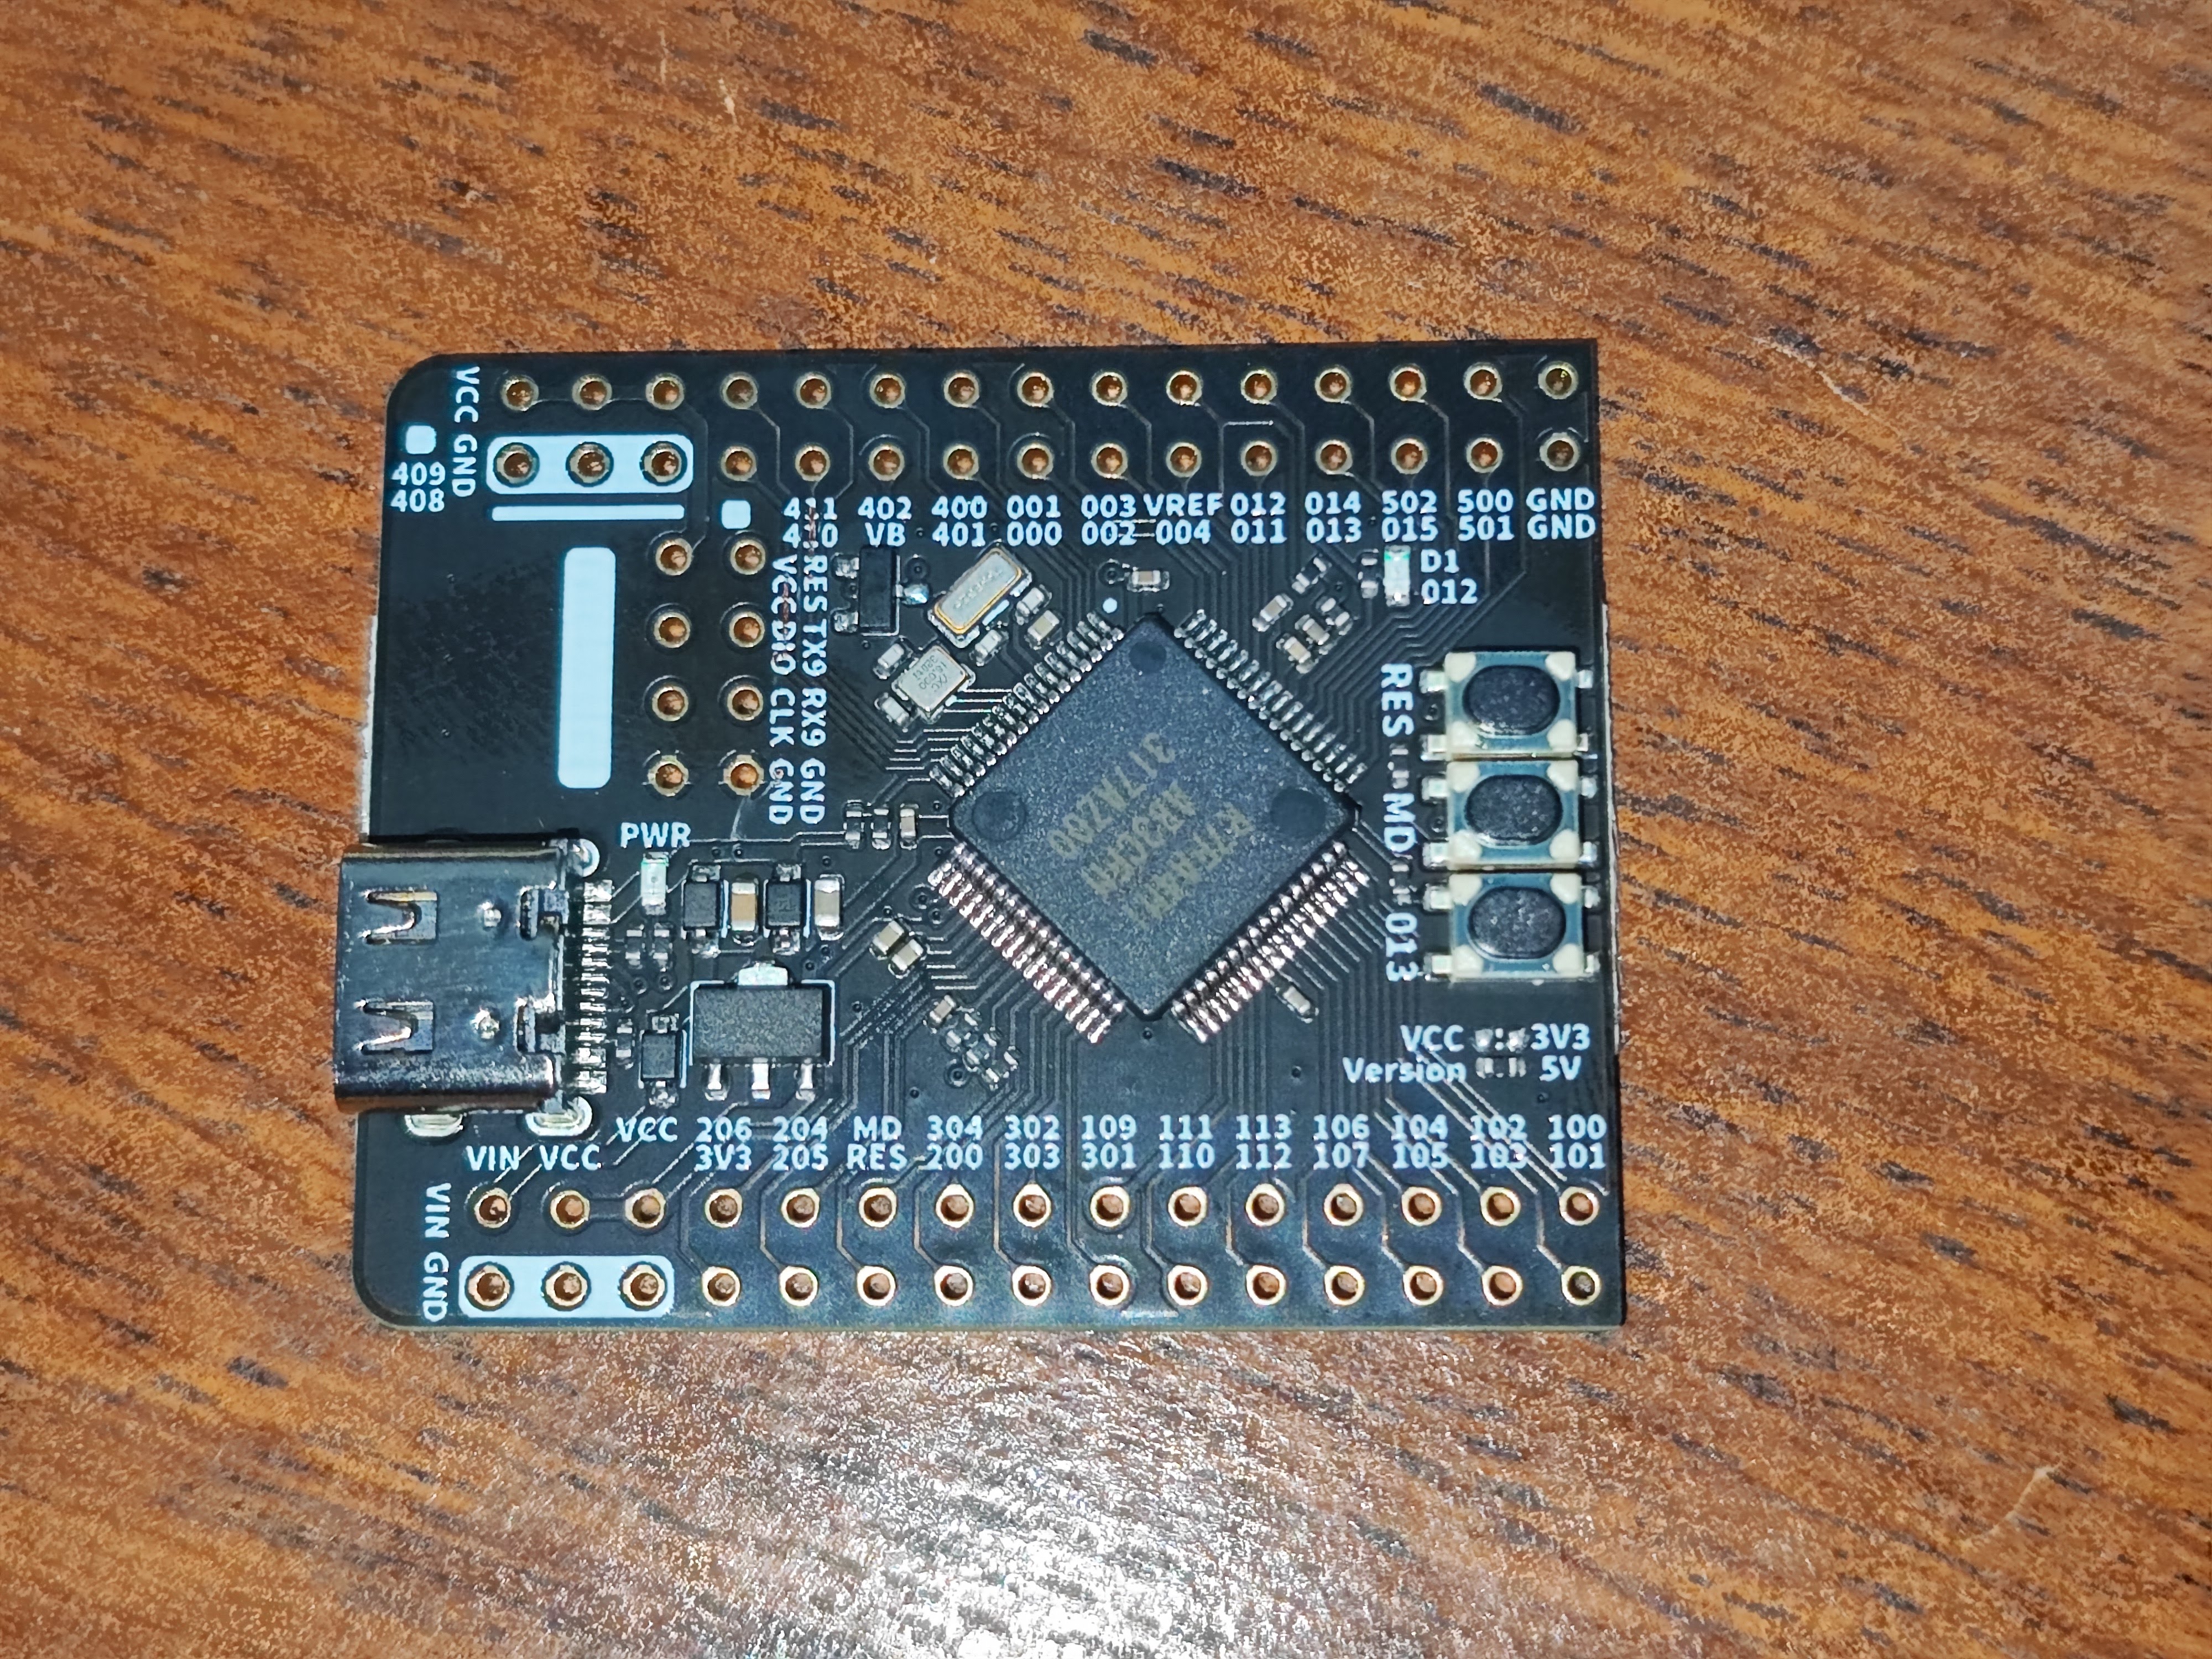 RA4M1 board overview